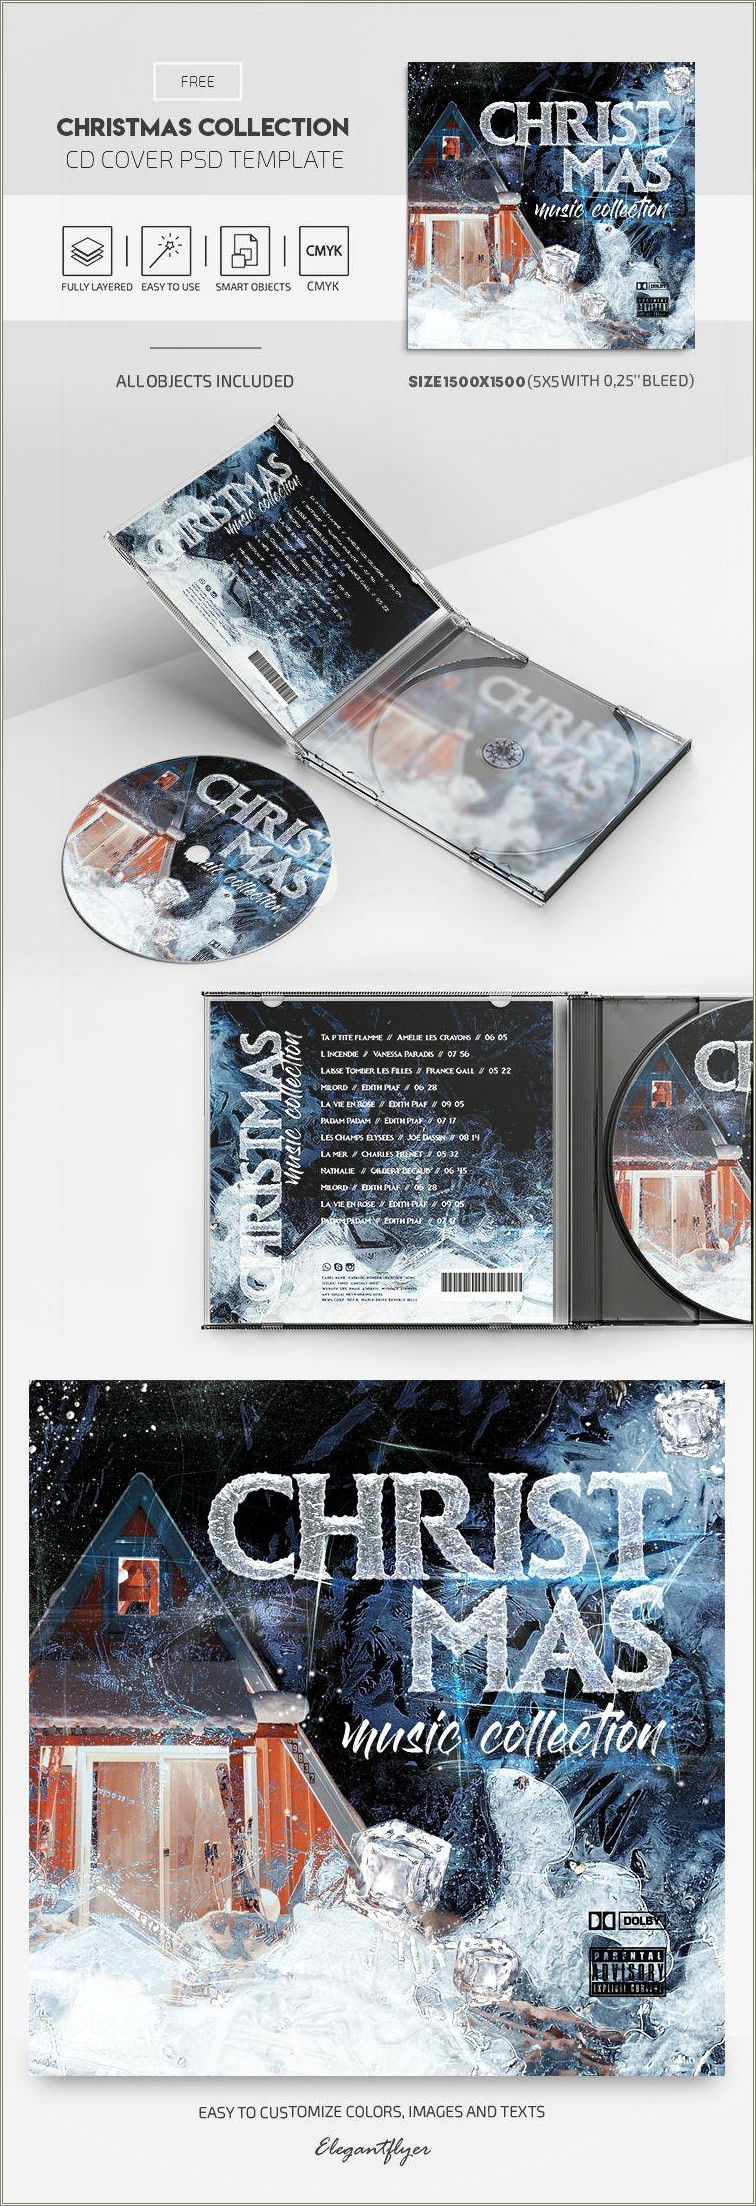 Free Cd Cover Design Template Photoshop